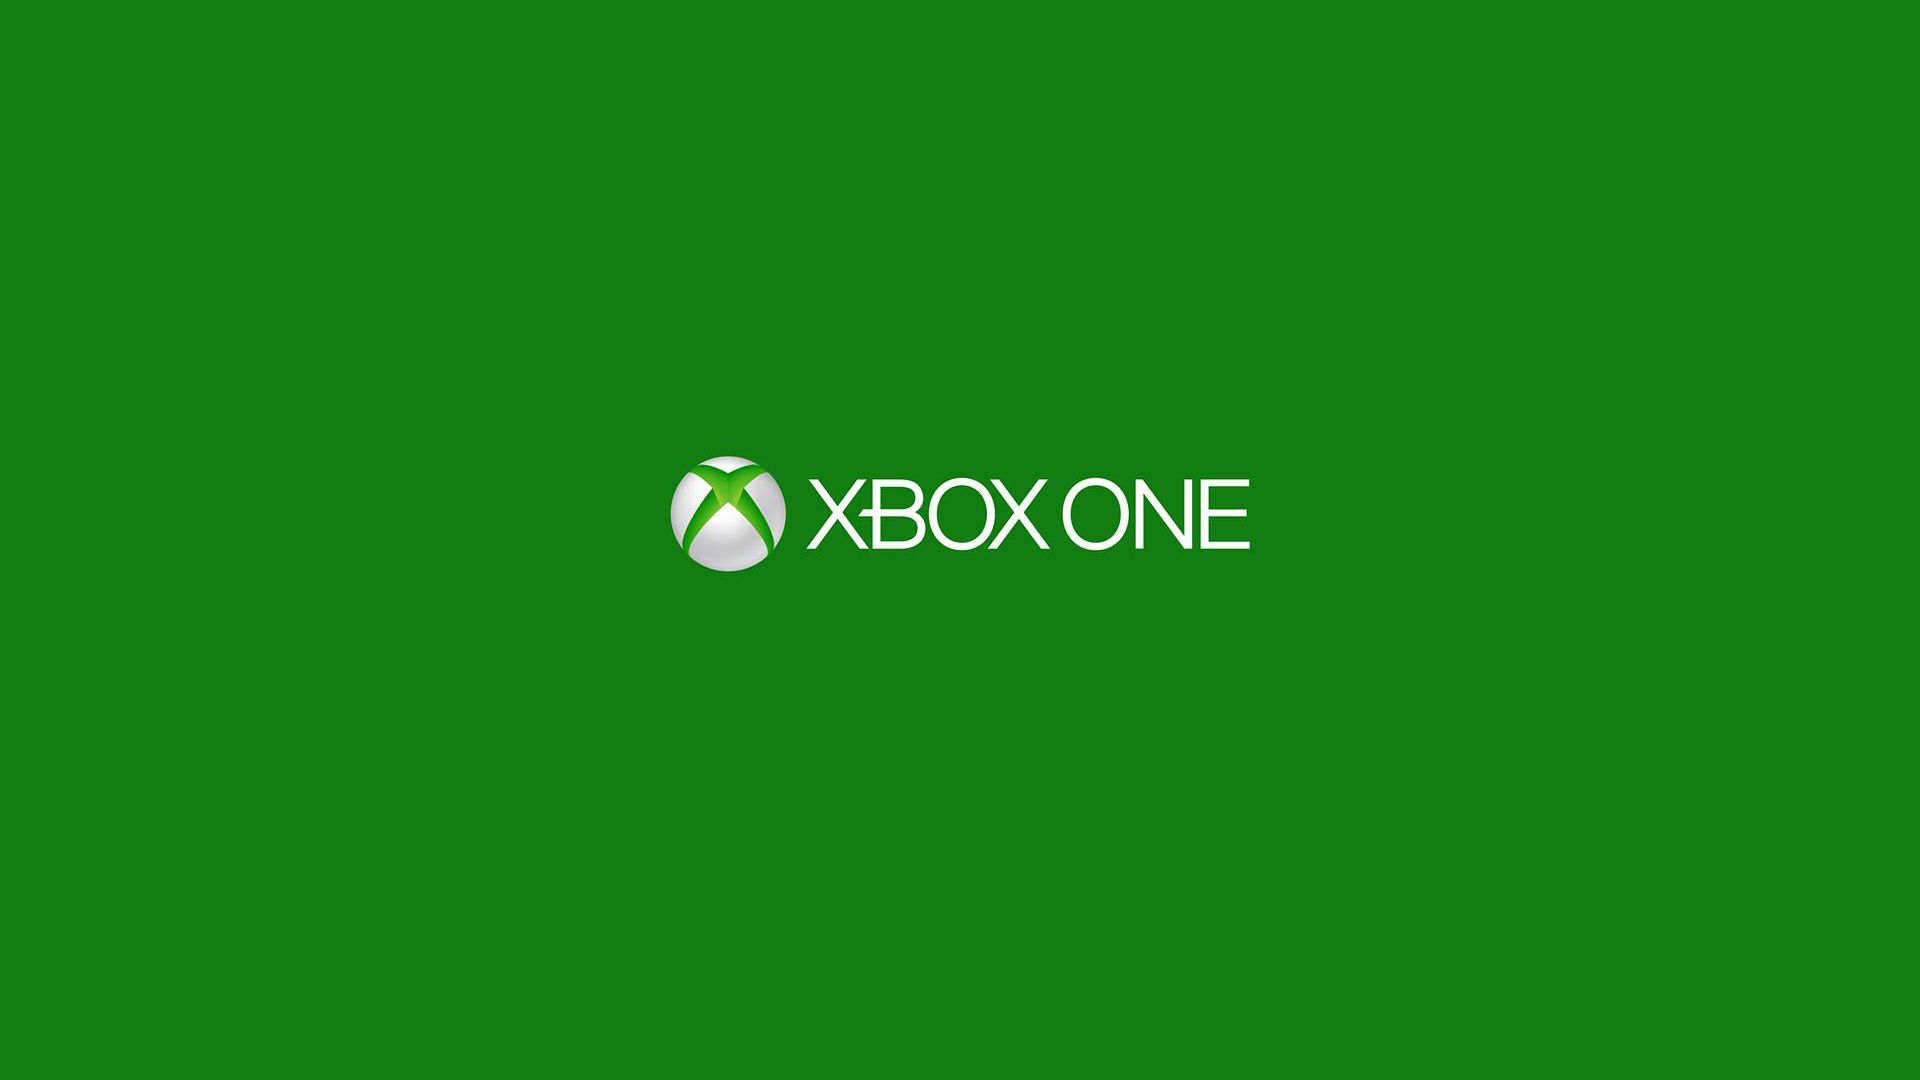 Xbox-One-Wallpaper – The Koalition